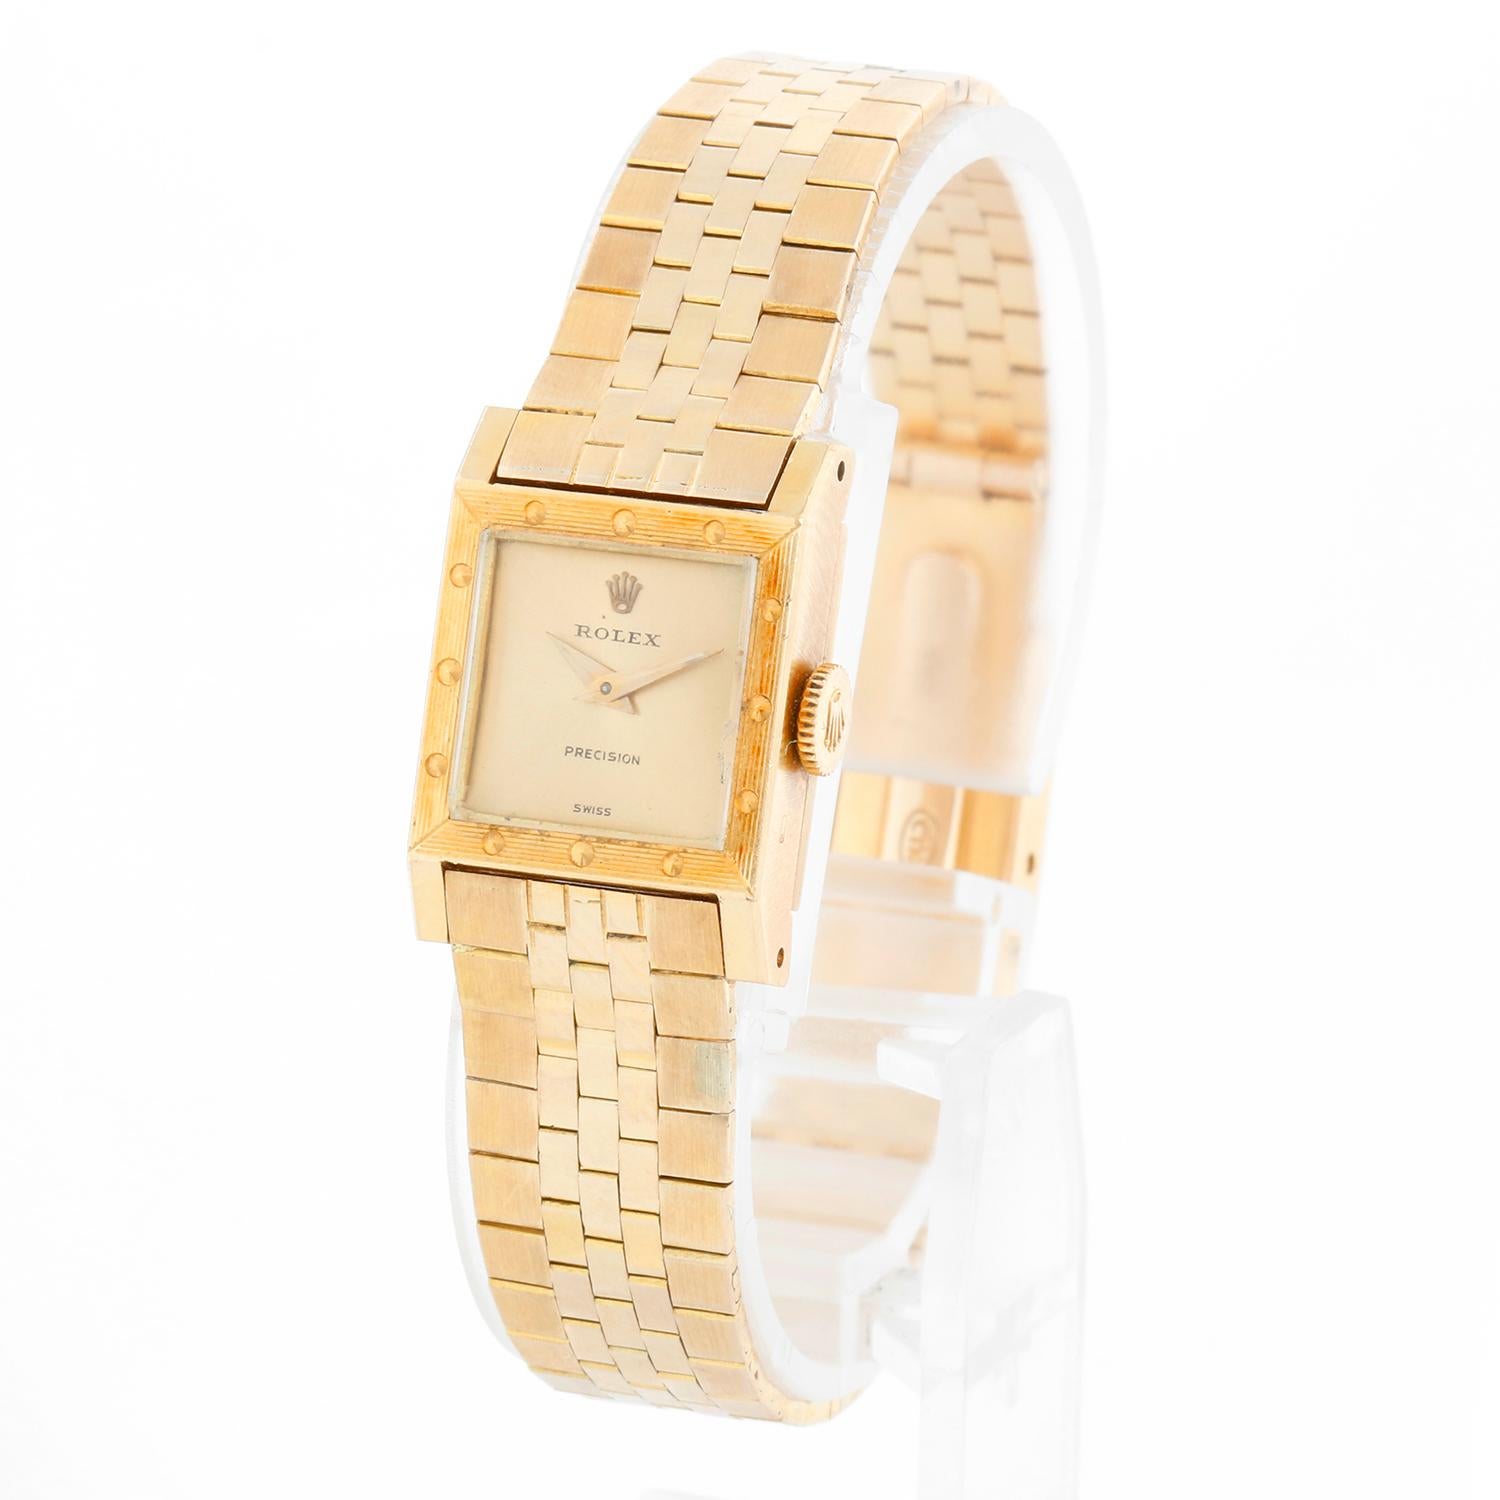 Vintage 18k Yellow Gold Ladies Square Rolex ref 9251 - Manual winding. Unpolished 18k yellow gold case with engraved bezel and dots at hours. Champagne dial. 18K Yellow gold bracelet. Will fit up to a 6 inch wrist. Pre-owned with Rolex box, extra